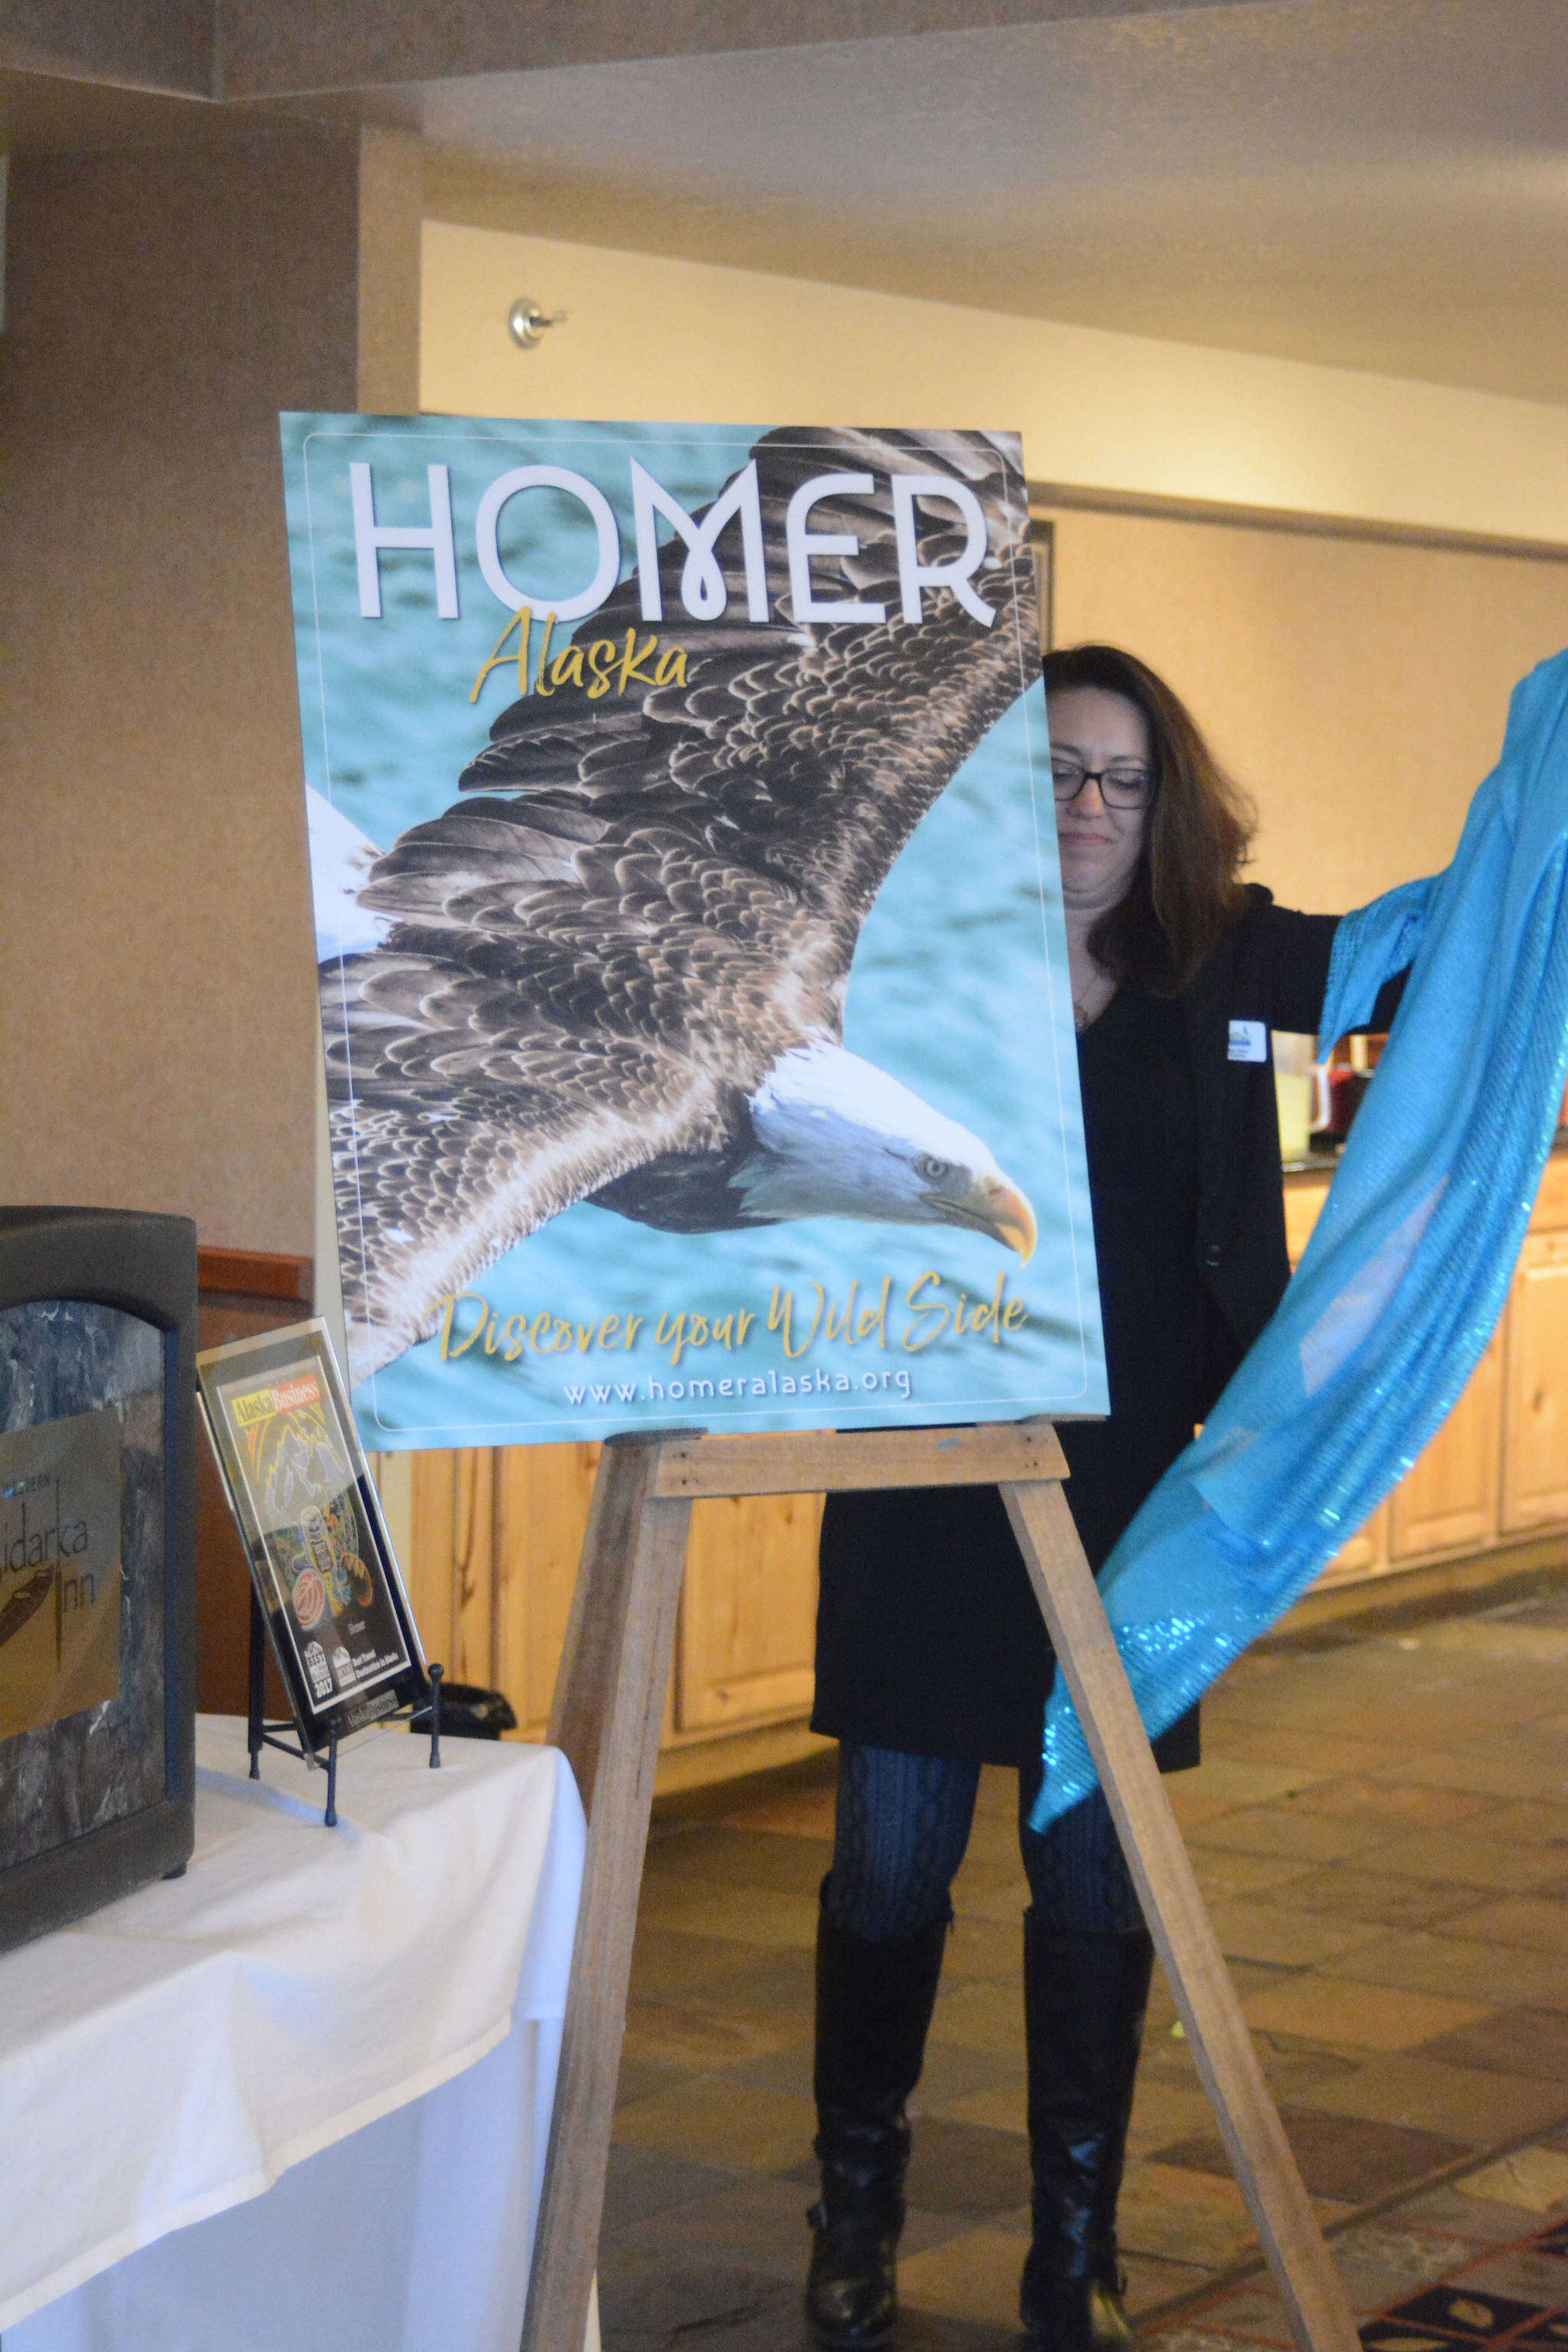 Homer Chamber of Commerce and Visitor Center board of director President Kari Ann Baker unveils the cover of the 2018 tourism and recreation guide at the chamber’s annual meeting on Tuesday, Jan. 16, 2018 at the Best Western Bidarka Inn in Homer, Alaska. The cover photo was taken by Collin Walker and picked in a contest held by the chamber. (Photo by Michael Armstrong, Homer News)